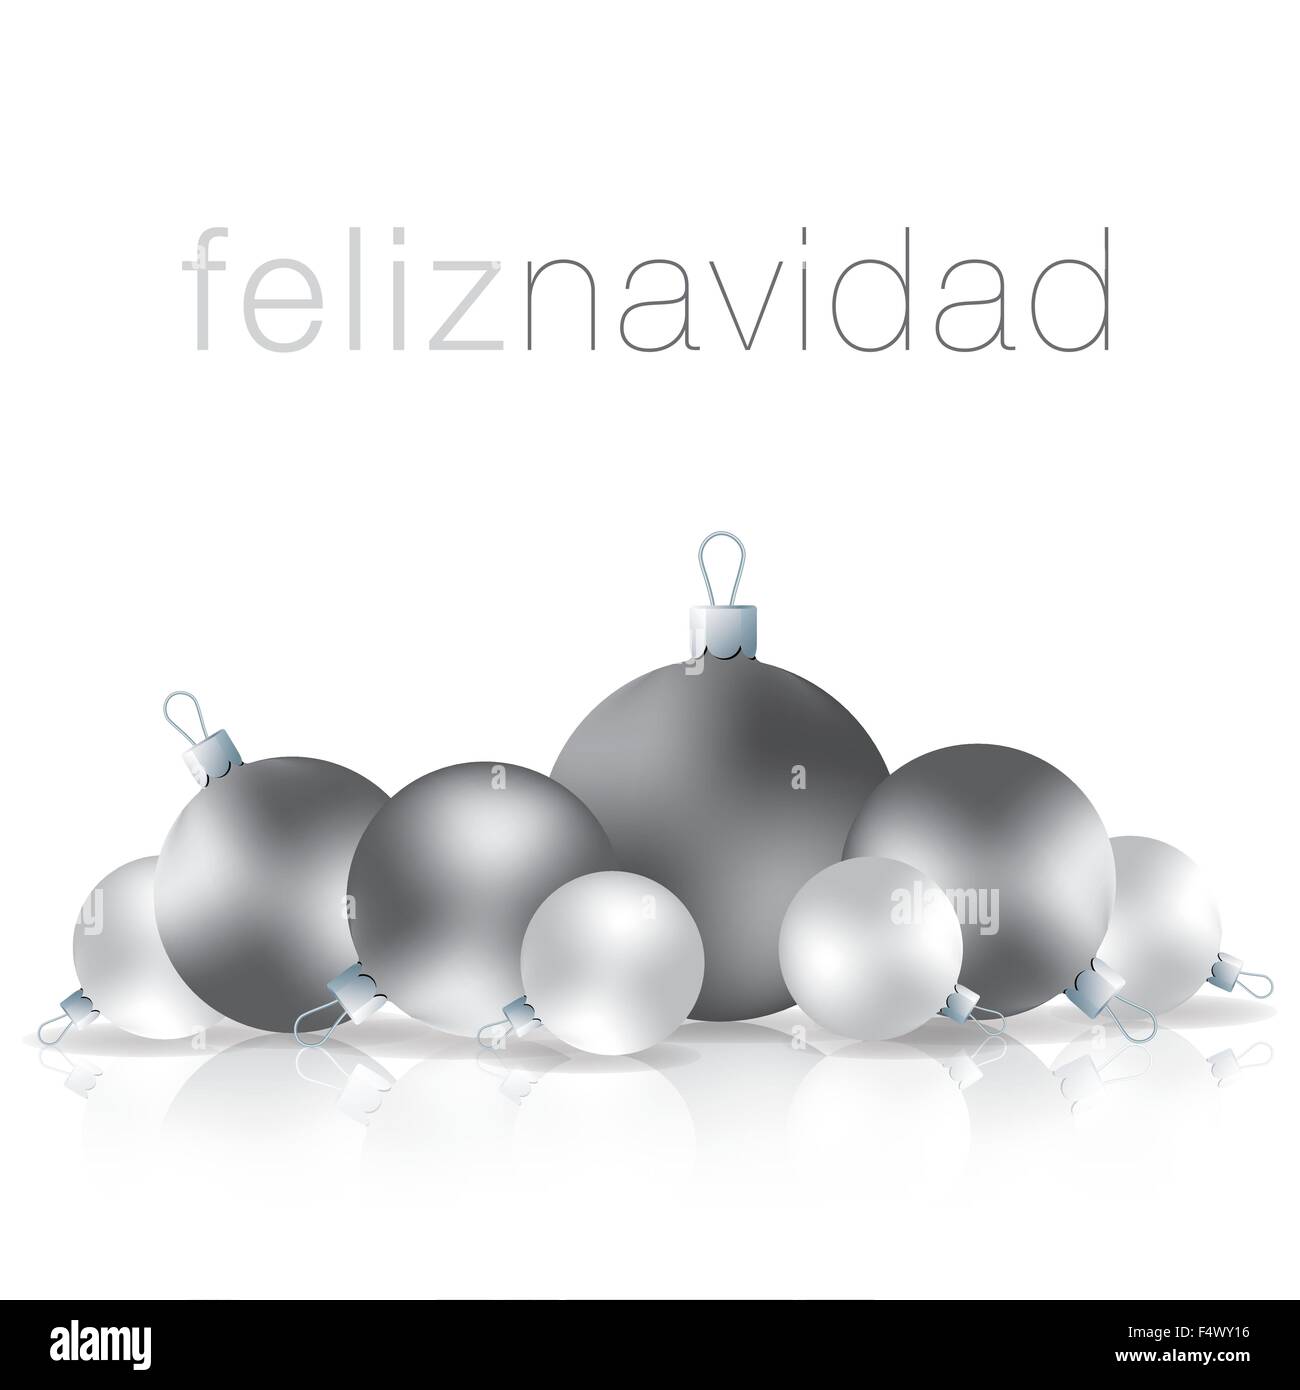 Spanish Merry Christmas bauble card in vector format. Stock Vector